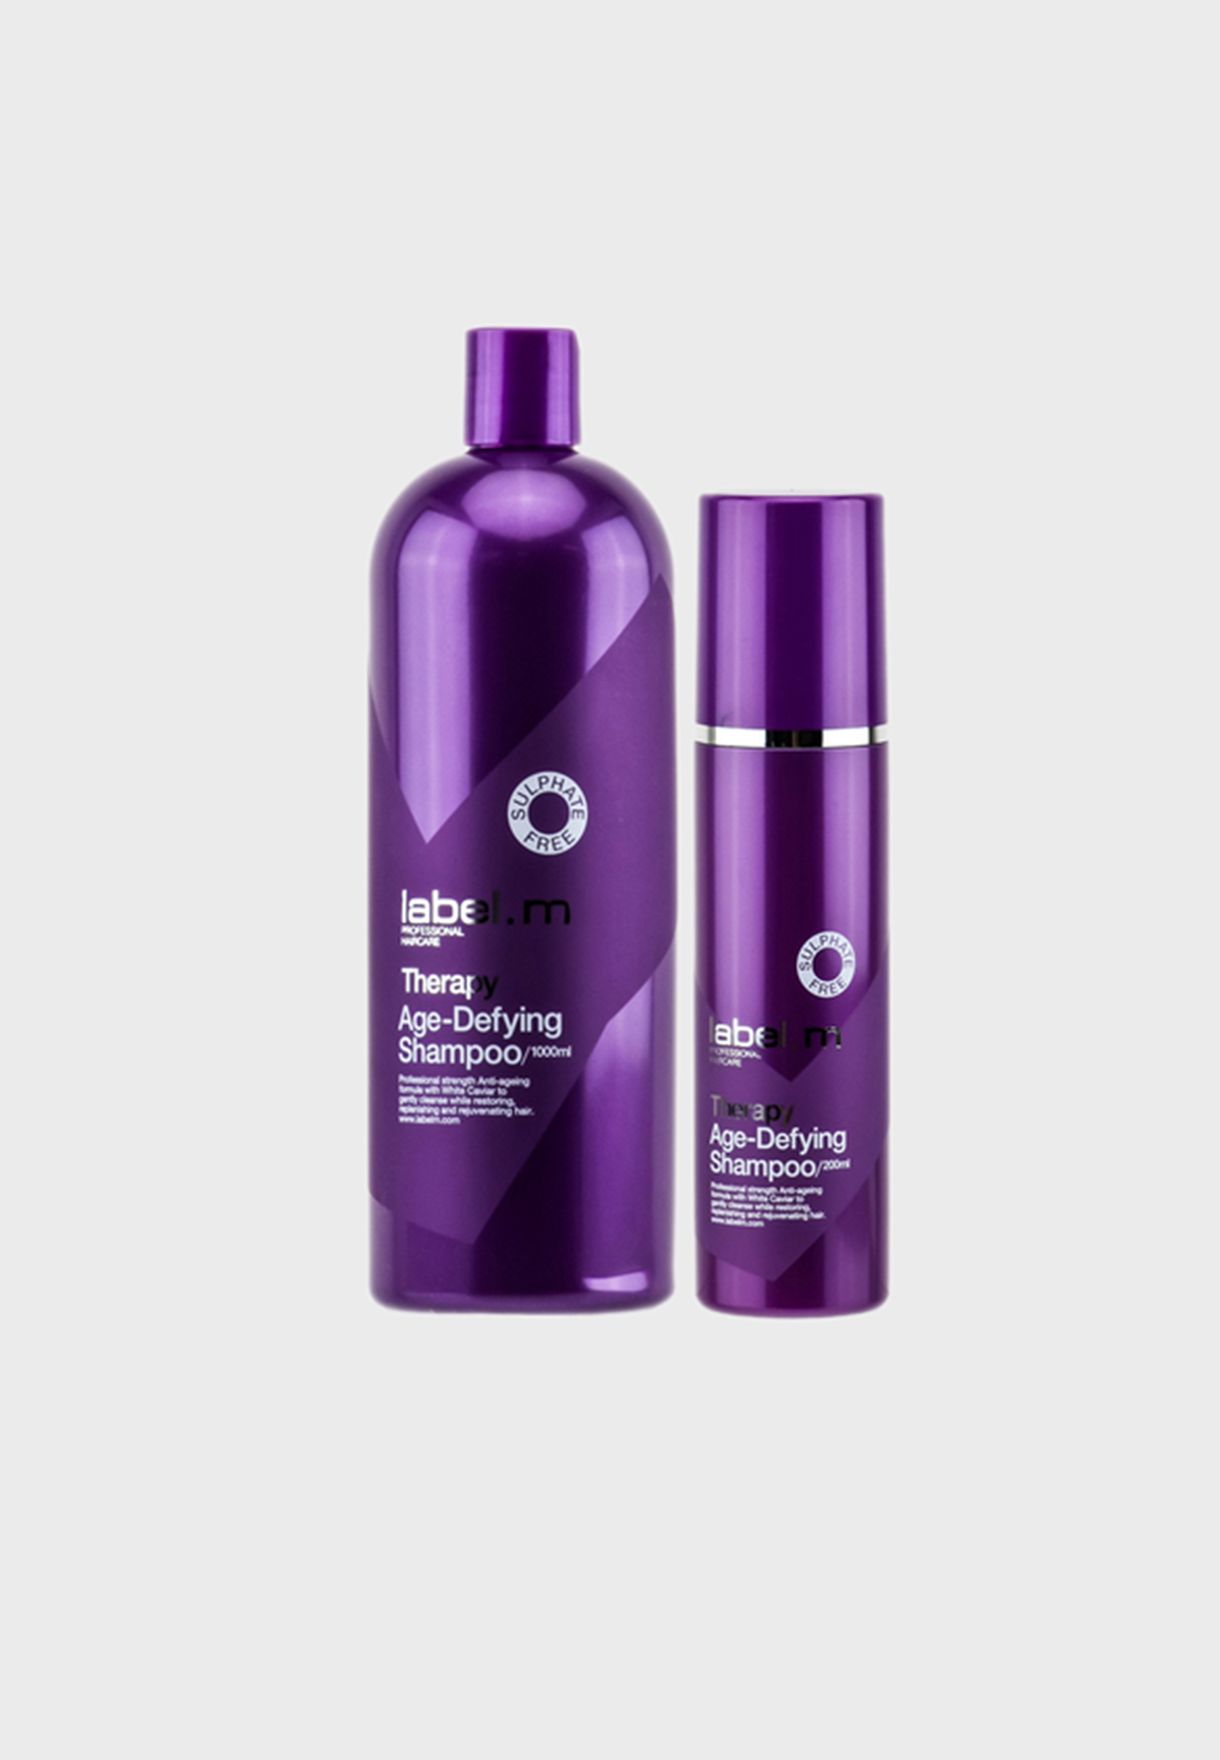 Therapy Age-Defying Shampoo 200Ml